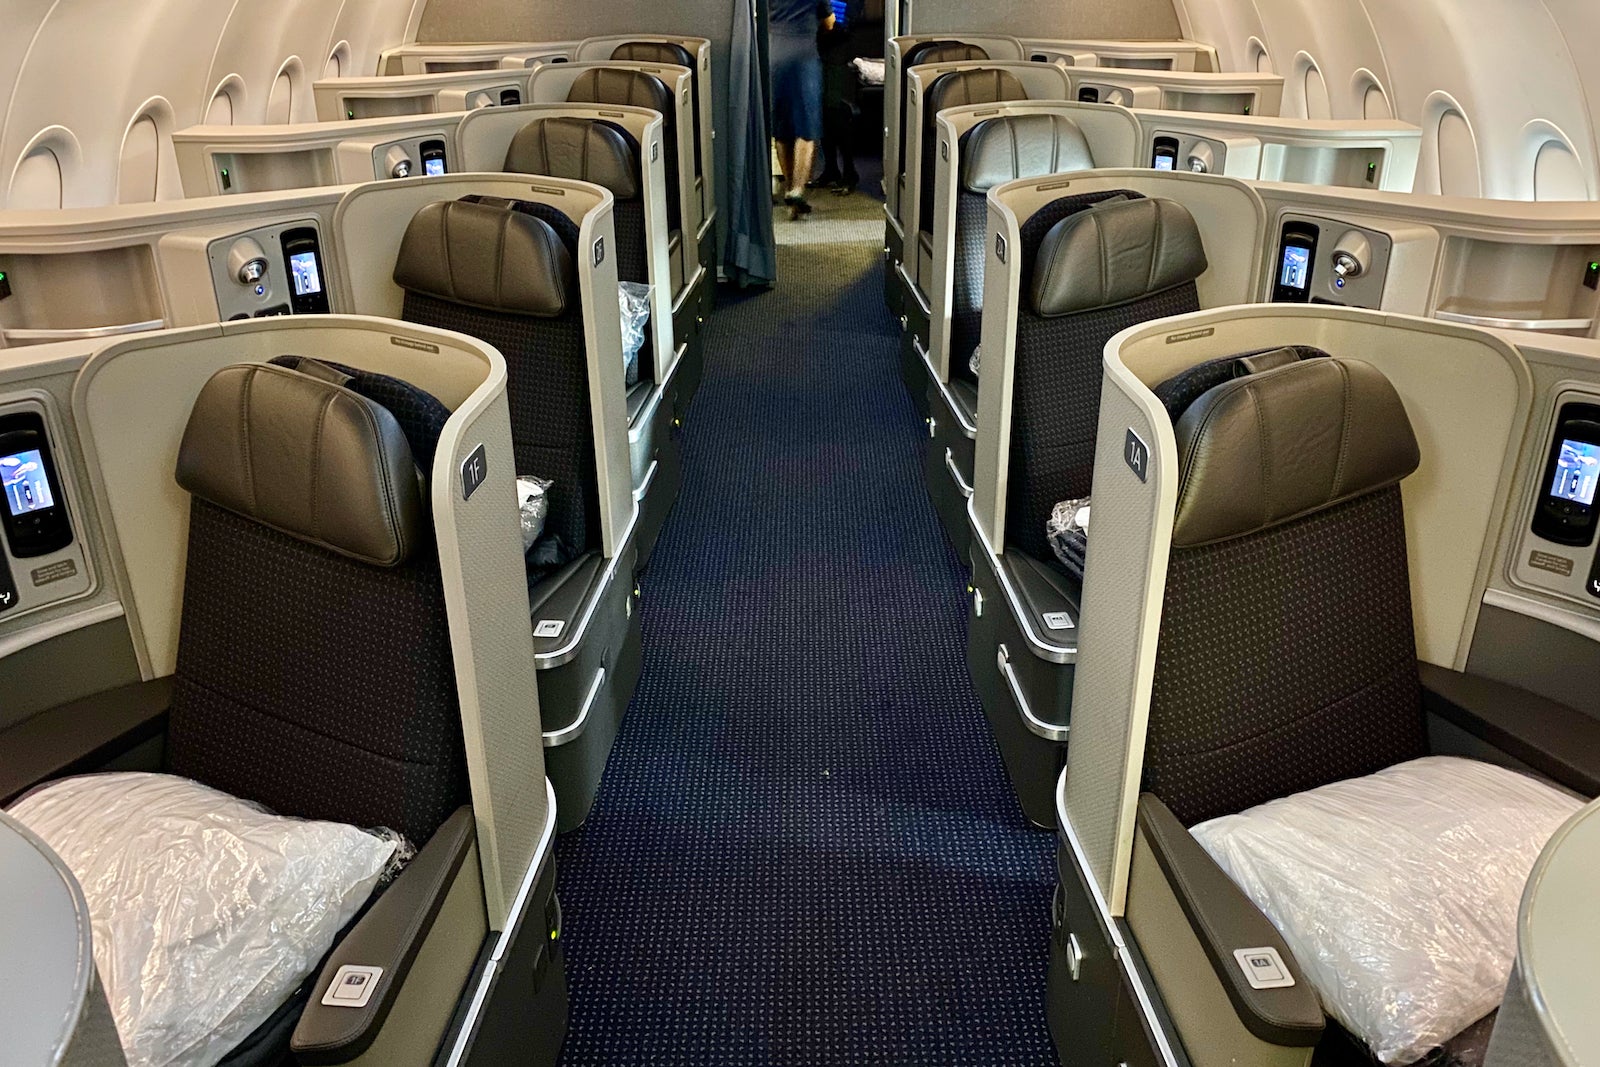 airplane cabin with empty seats